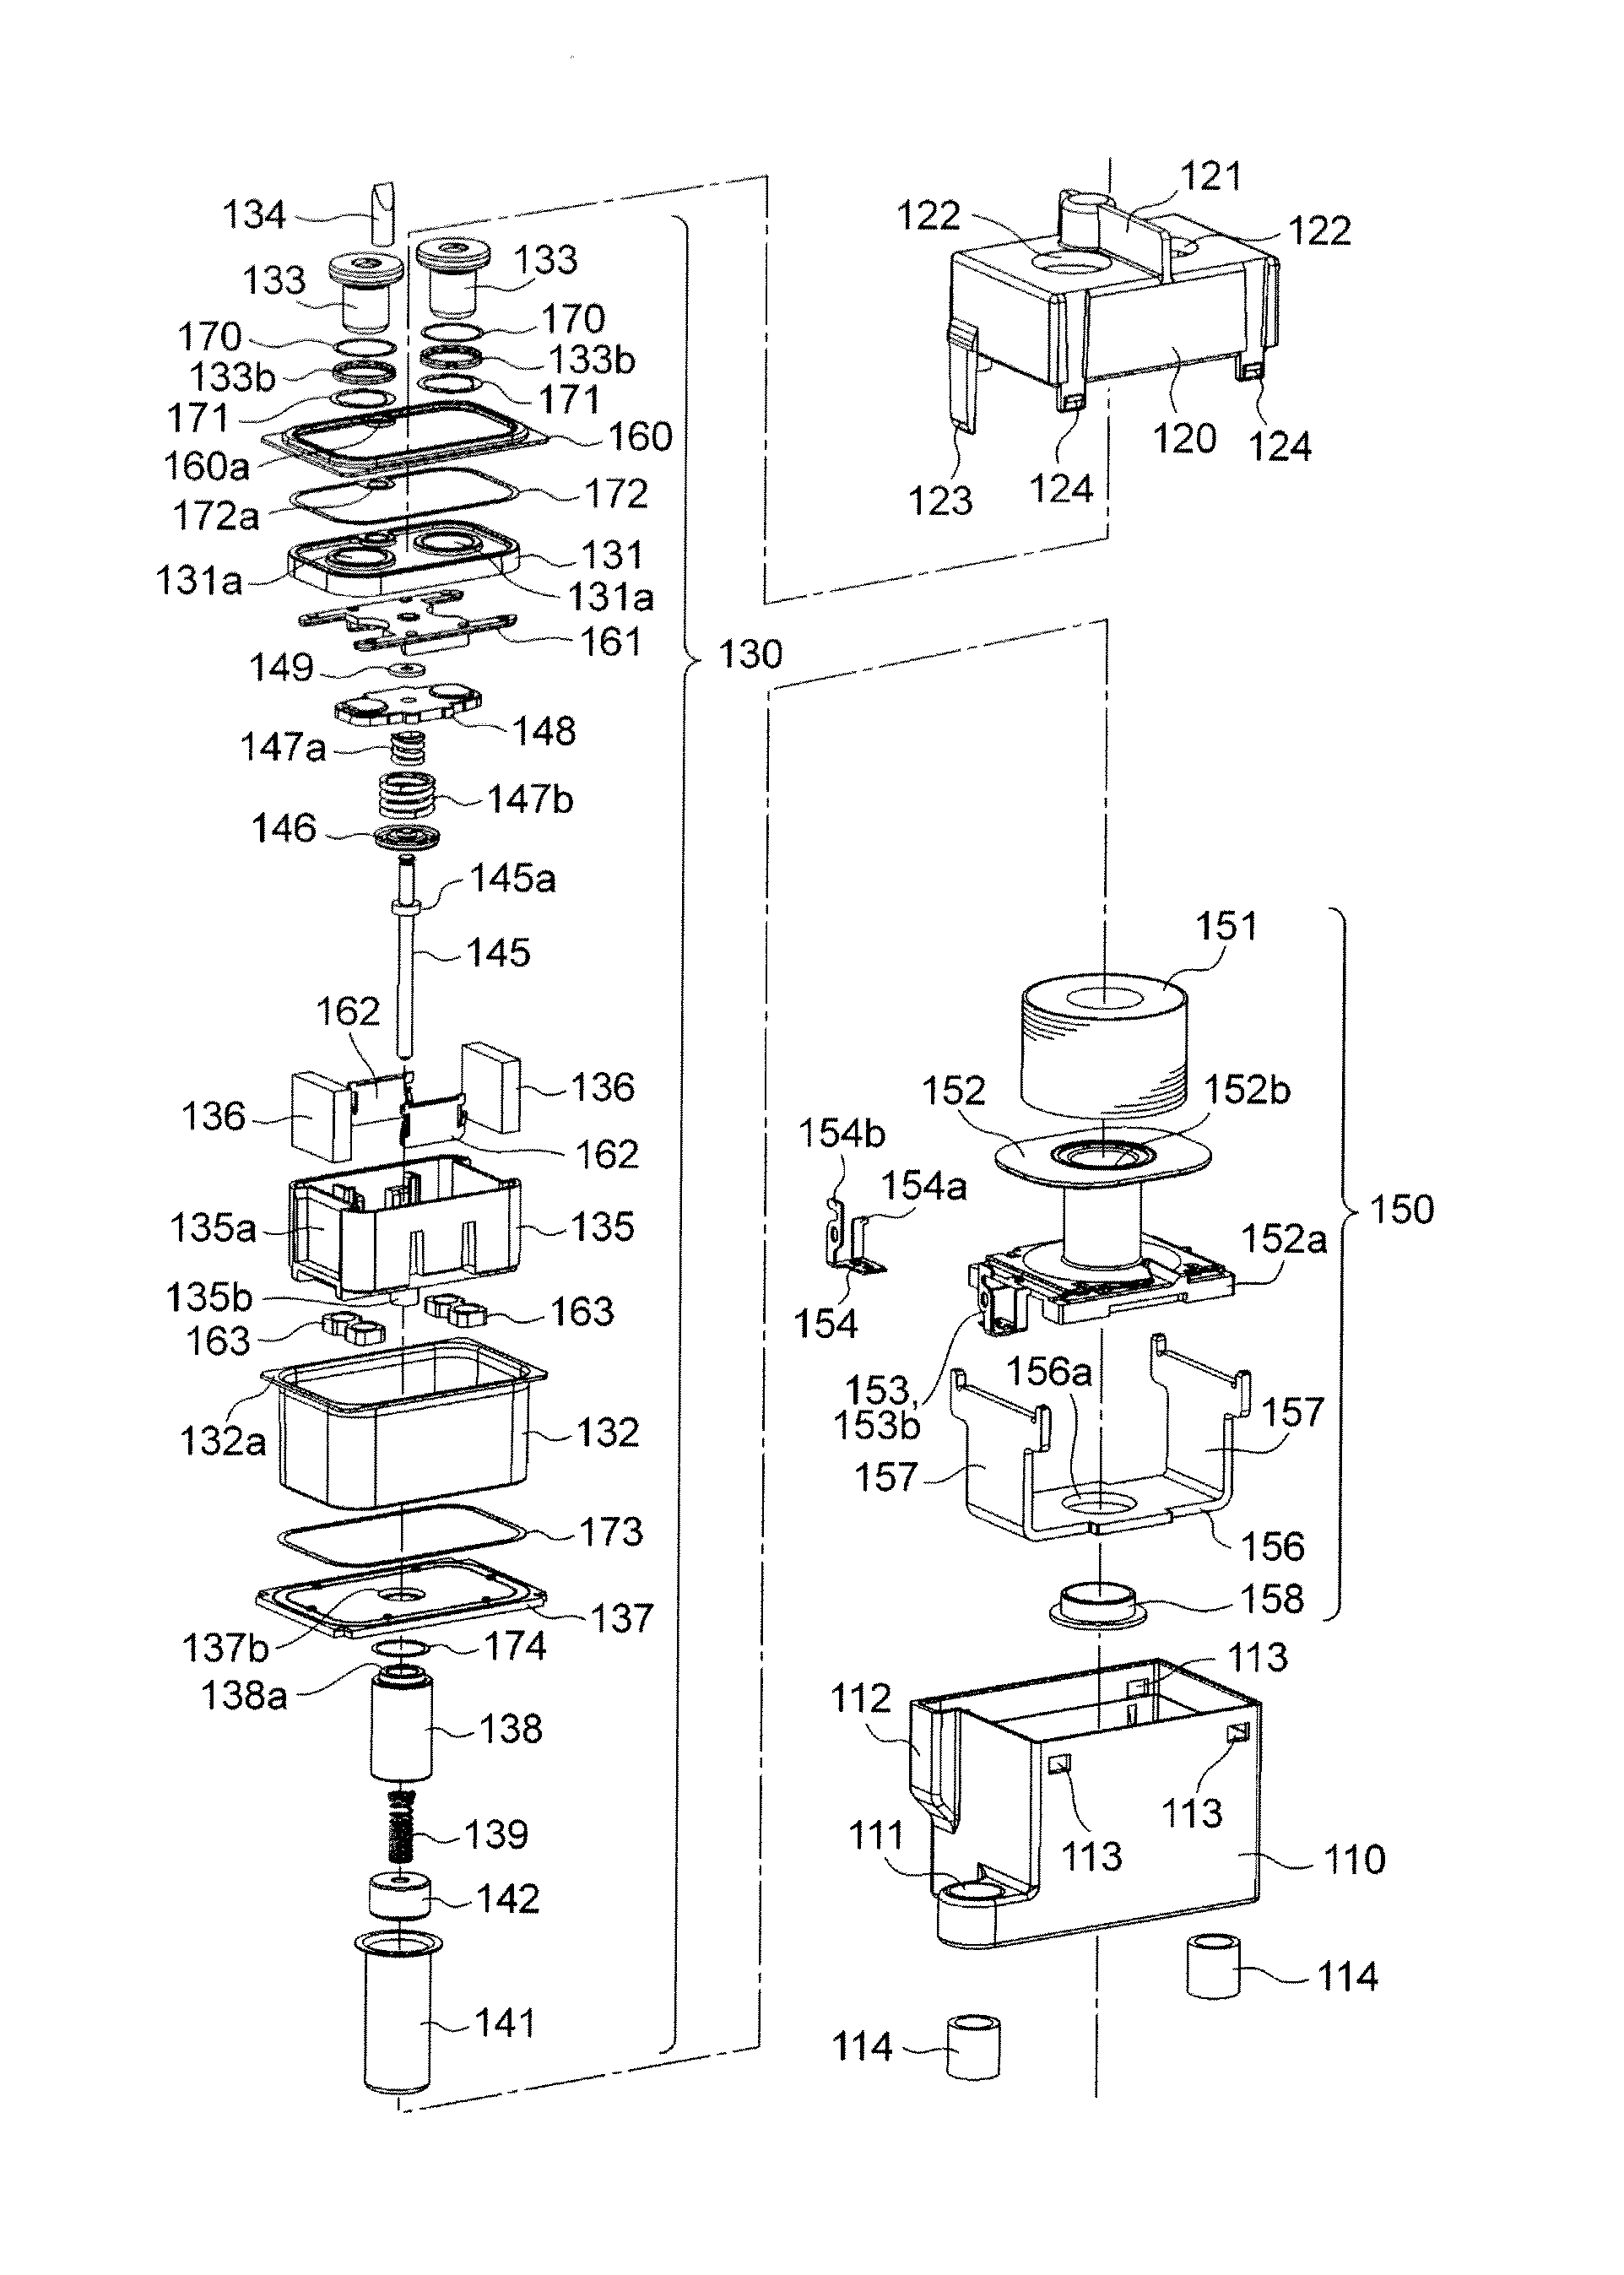 Contact switching device